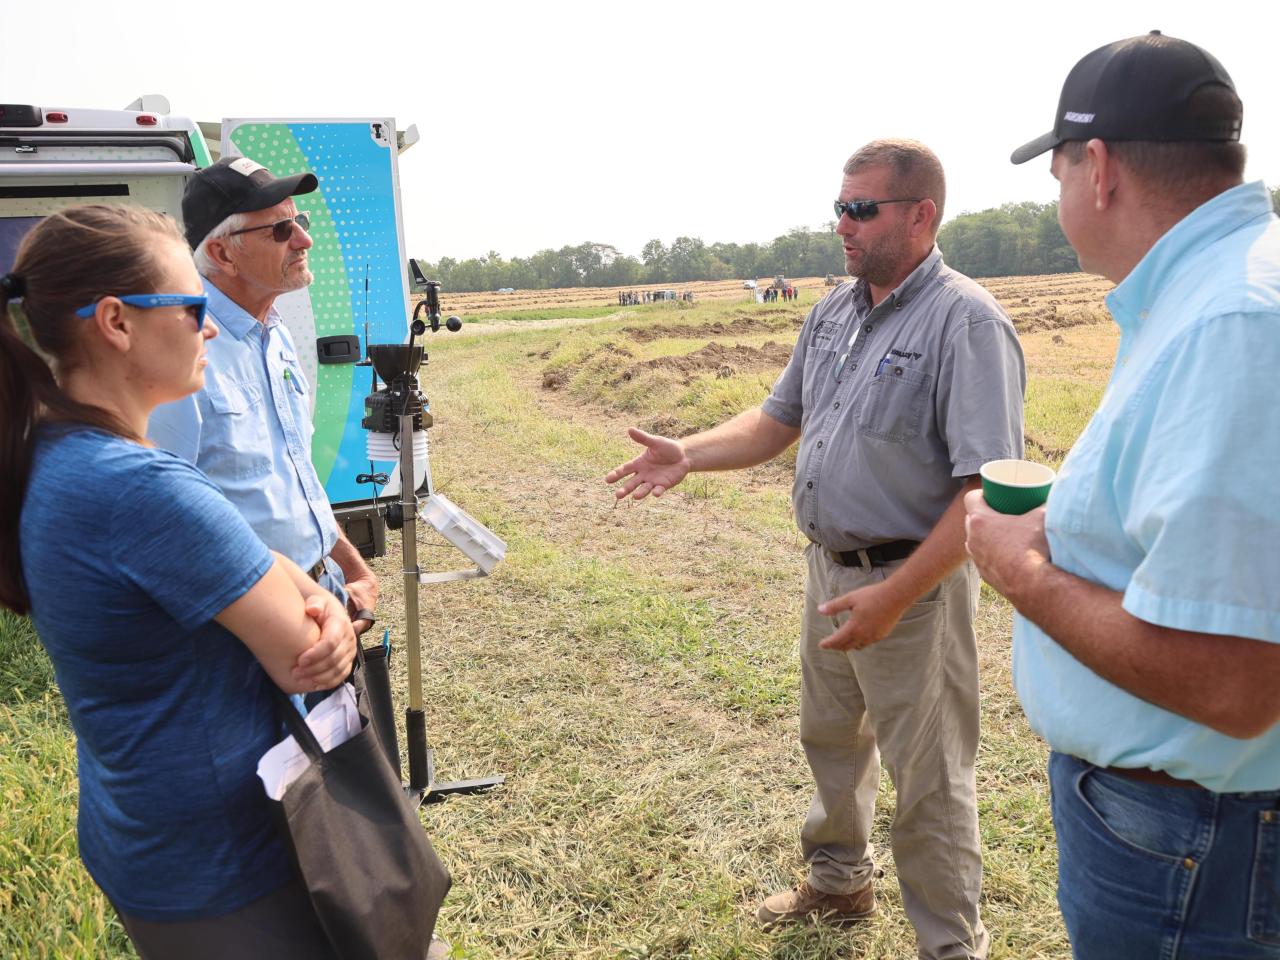 Drainage day participants discuss overhead irrigation with industry experts